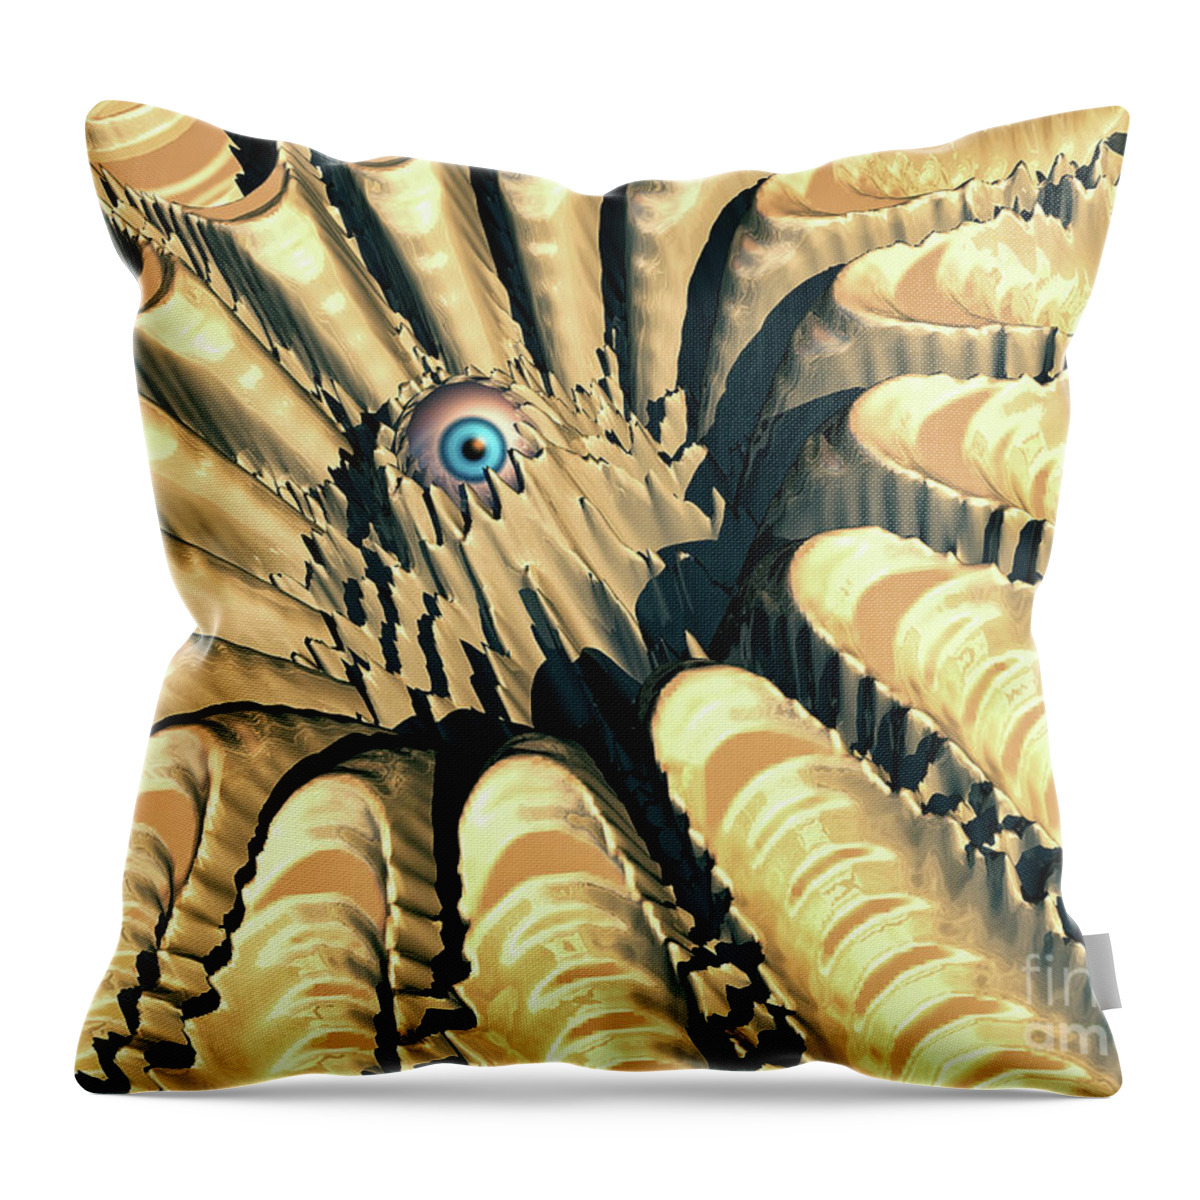 Science Fiction Throw Pillow featuring the digital art Eye of The Crater by Phil Perkins